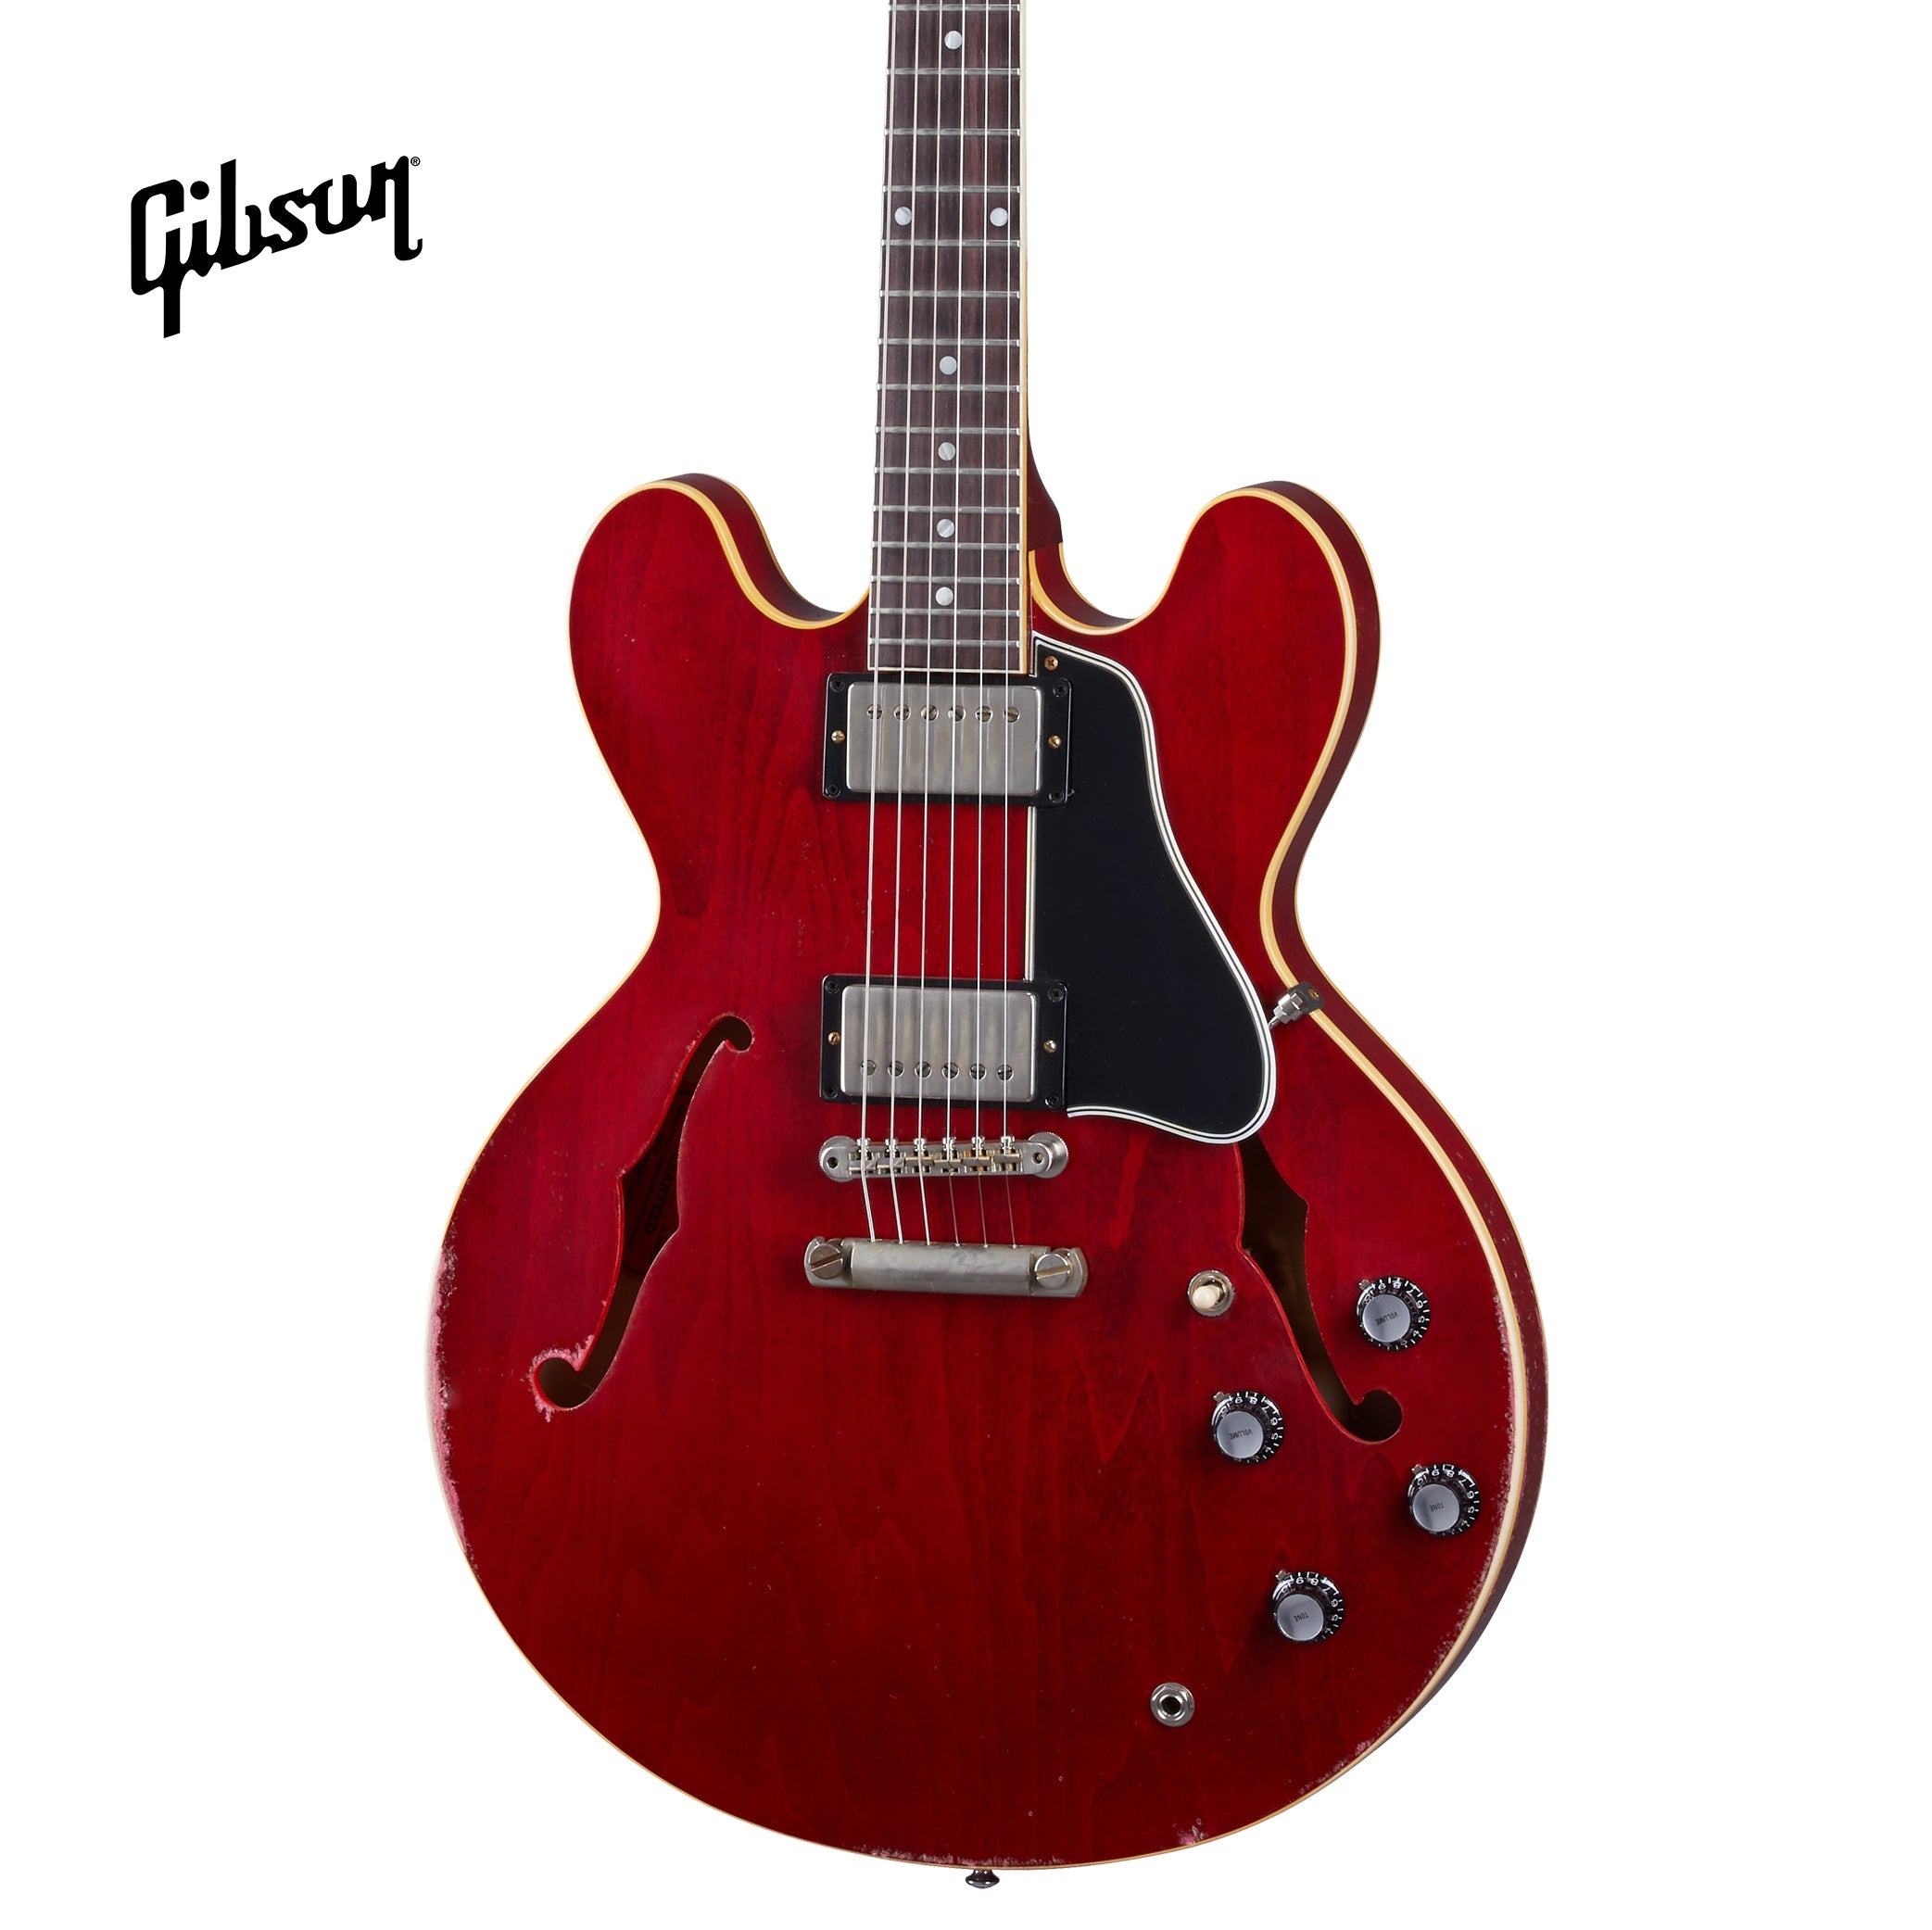 GIBSON 1961 ES-335 REISSUE HEAVY AGED SEMI-HOLLOWBODY ELECTRIC GUITAR - 60S CHERRY